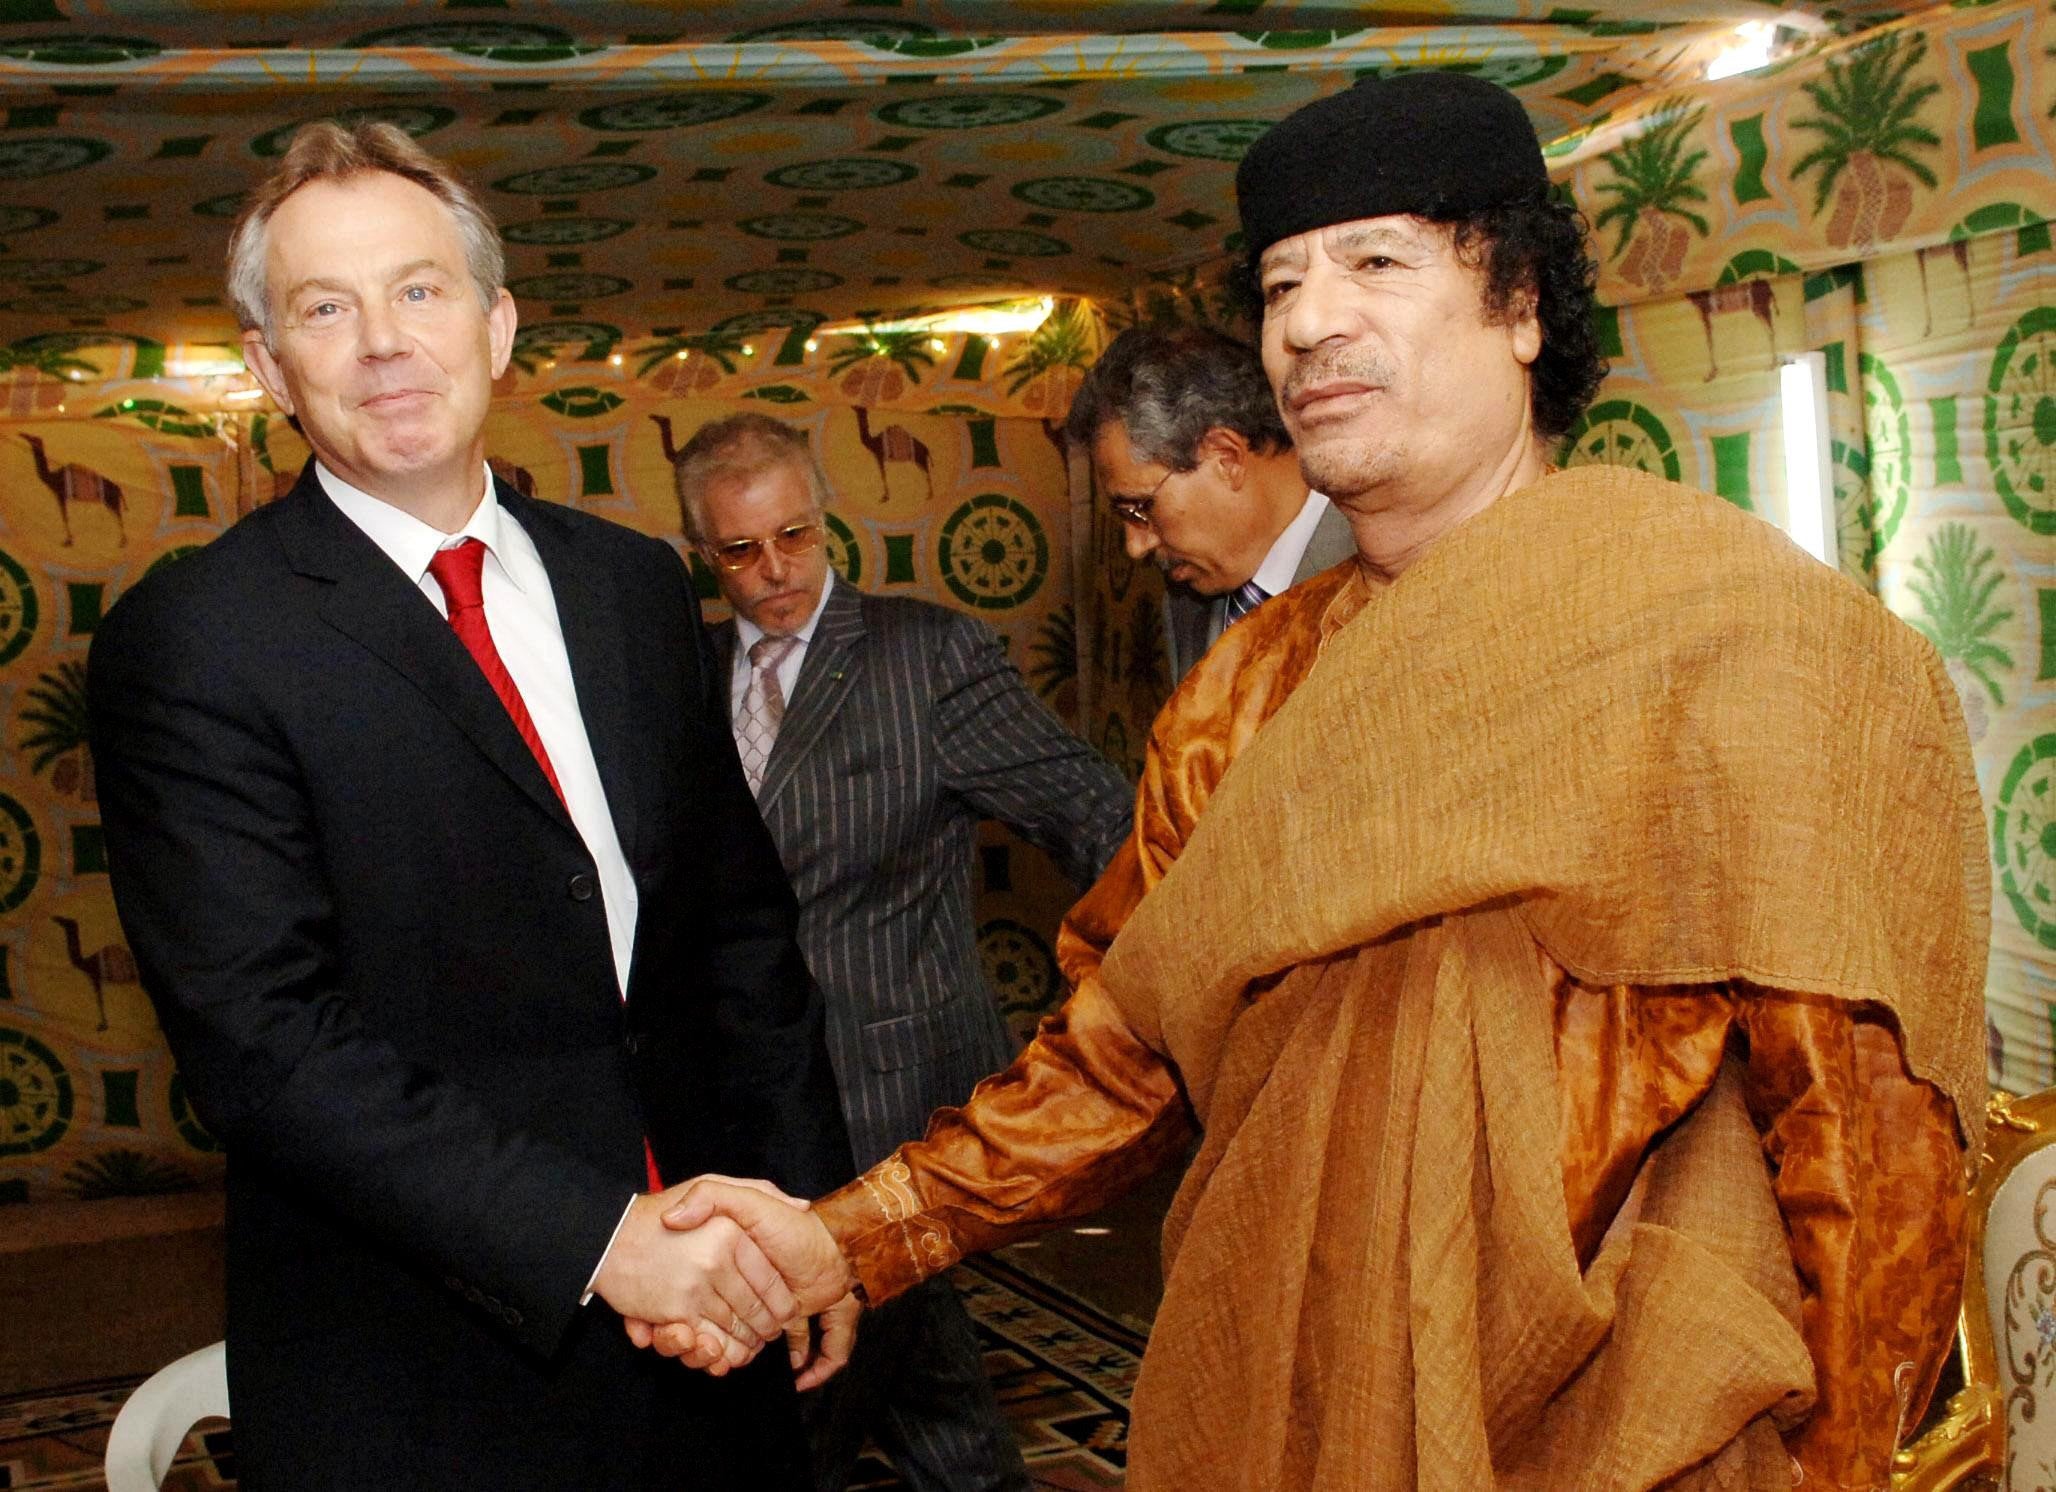 Tony Blair and Colonel Gaddafi shake hands during the famous 2004 'deal in the desert'